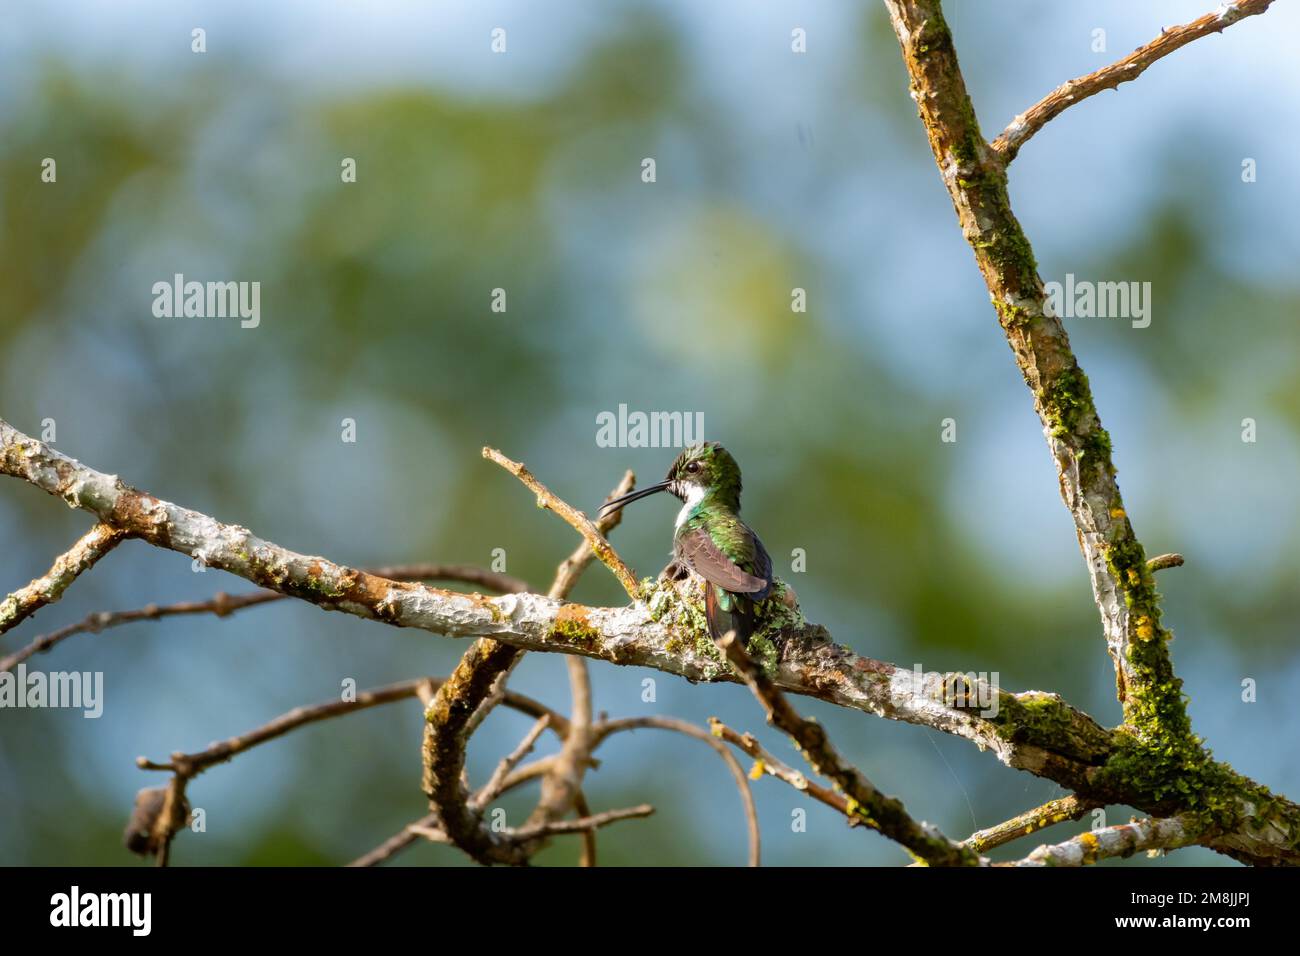 Black-throated mango hummingbird building chirping while sitting on her nest on the Caribbean island of Trinidad. Stock Photo